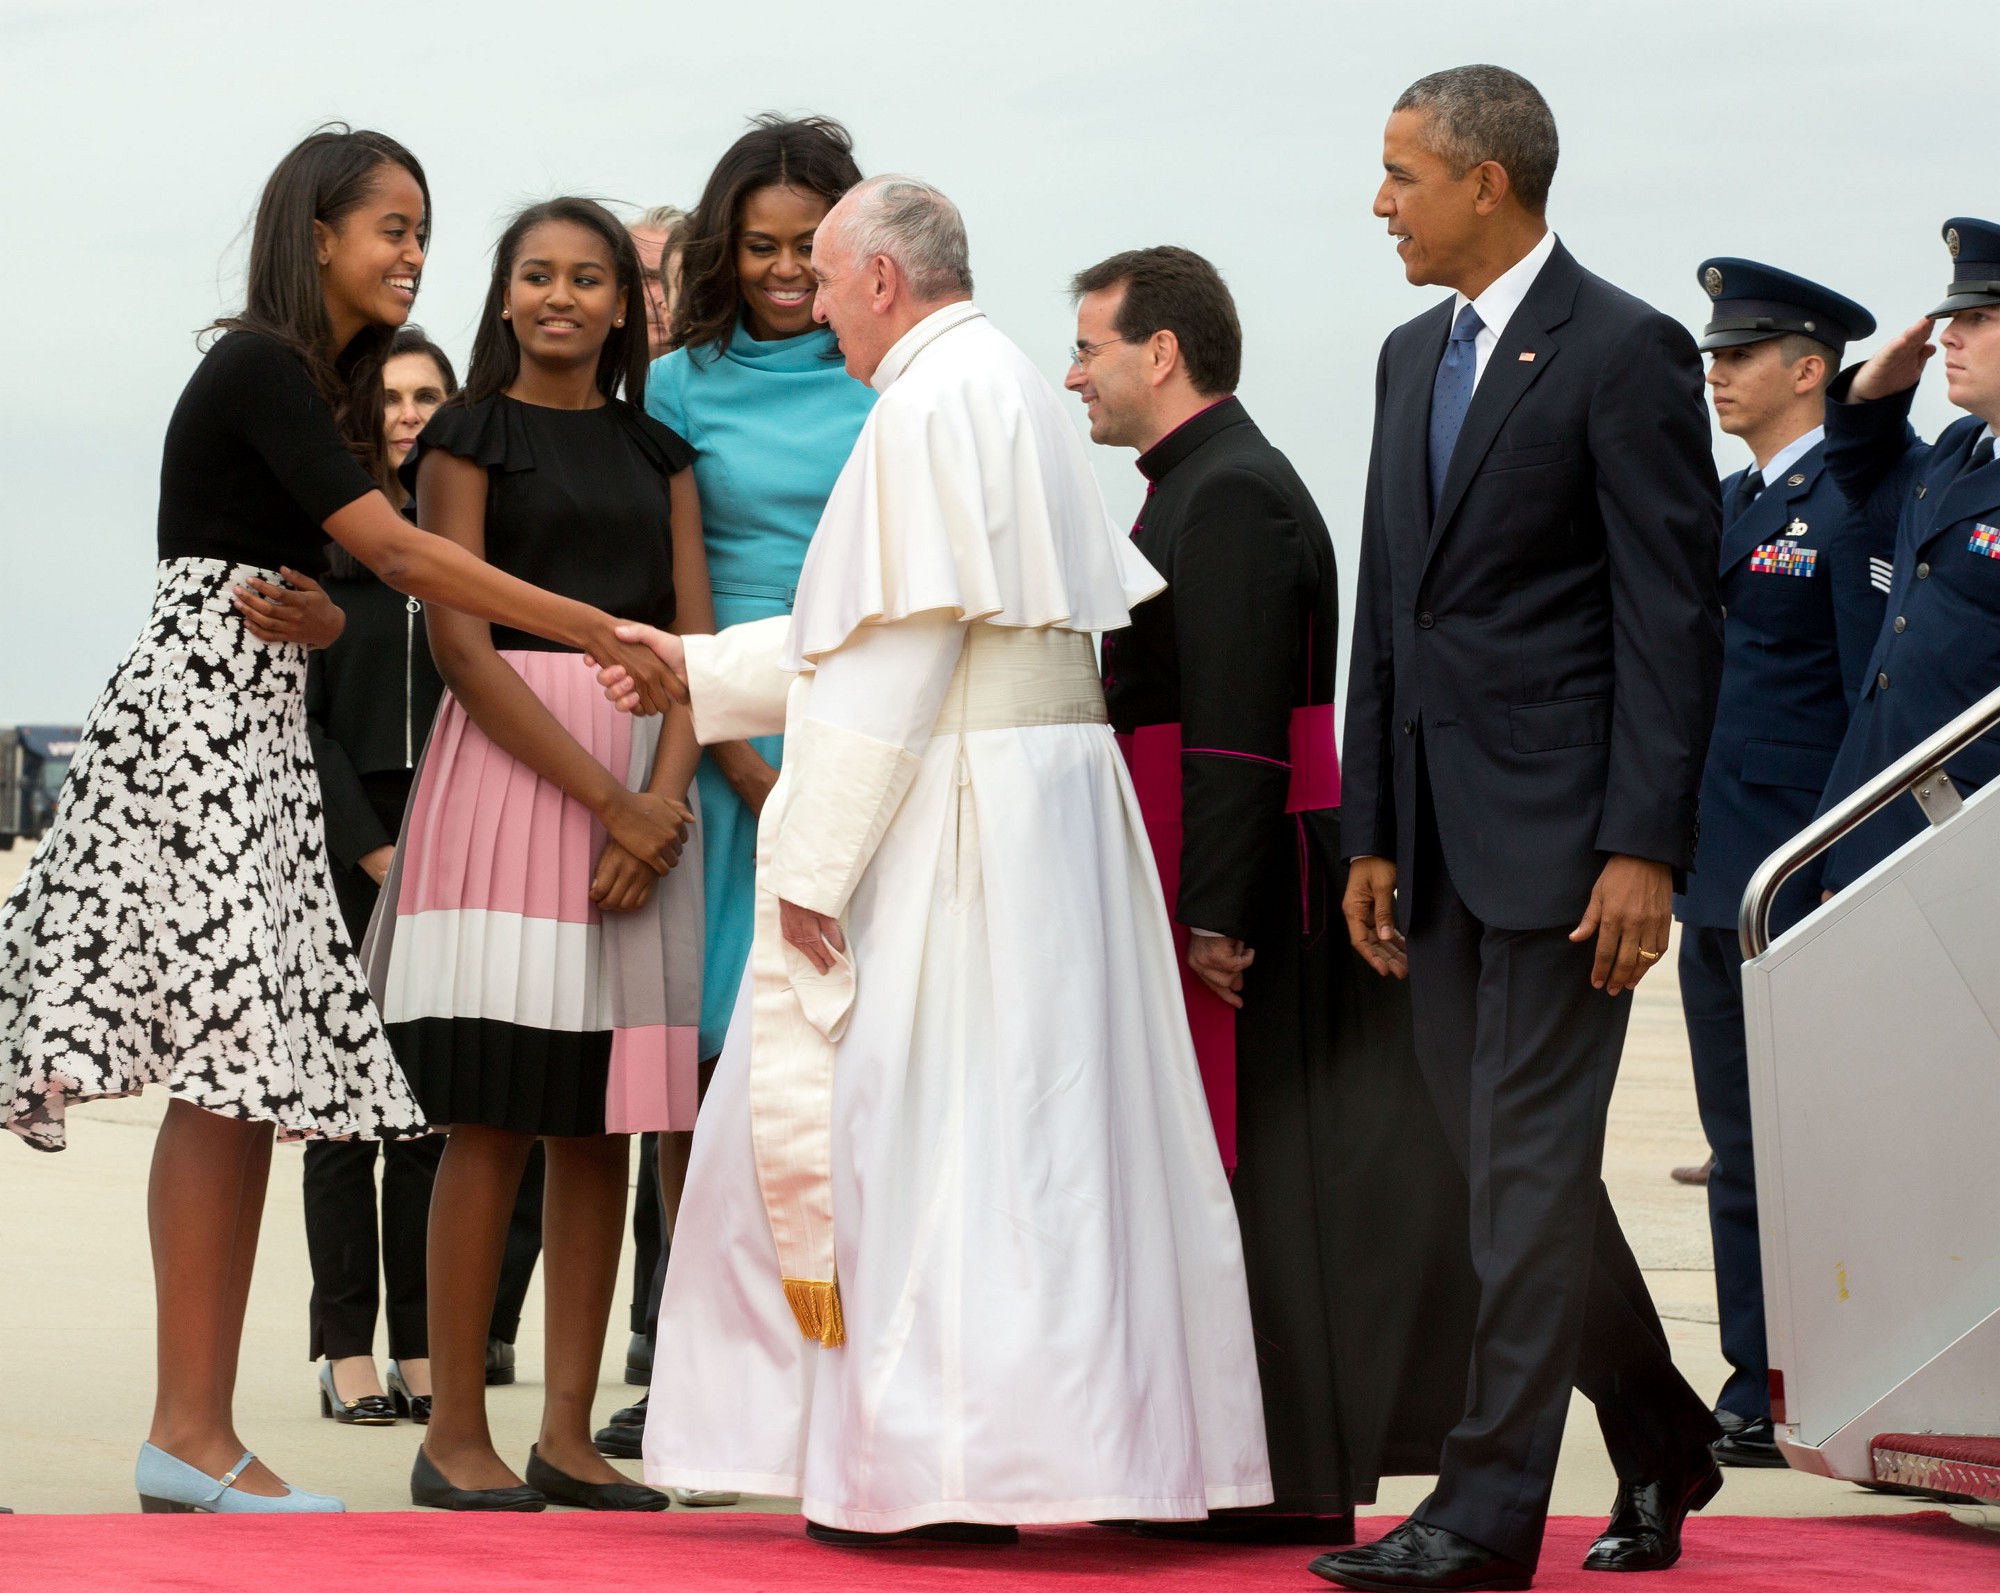 Malia shakes hands with Pope Francis. (Official White House Photo by Chuck Kennedy)